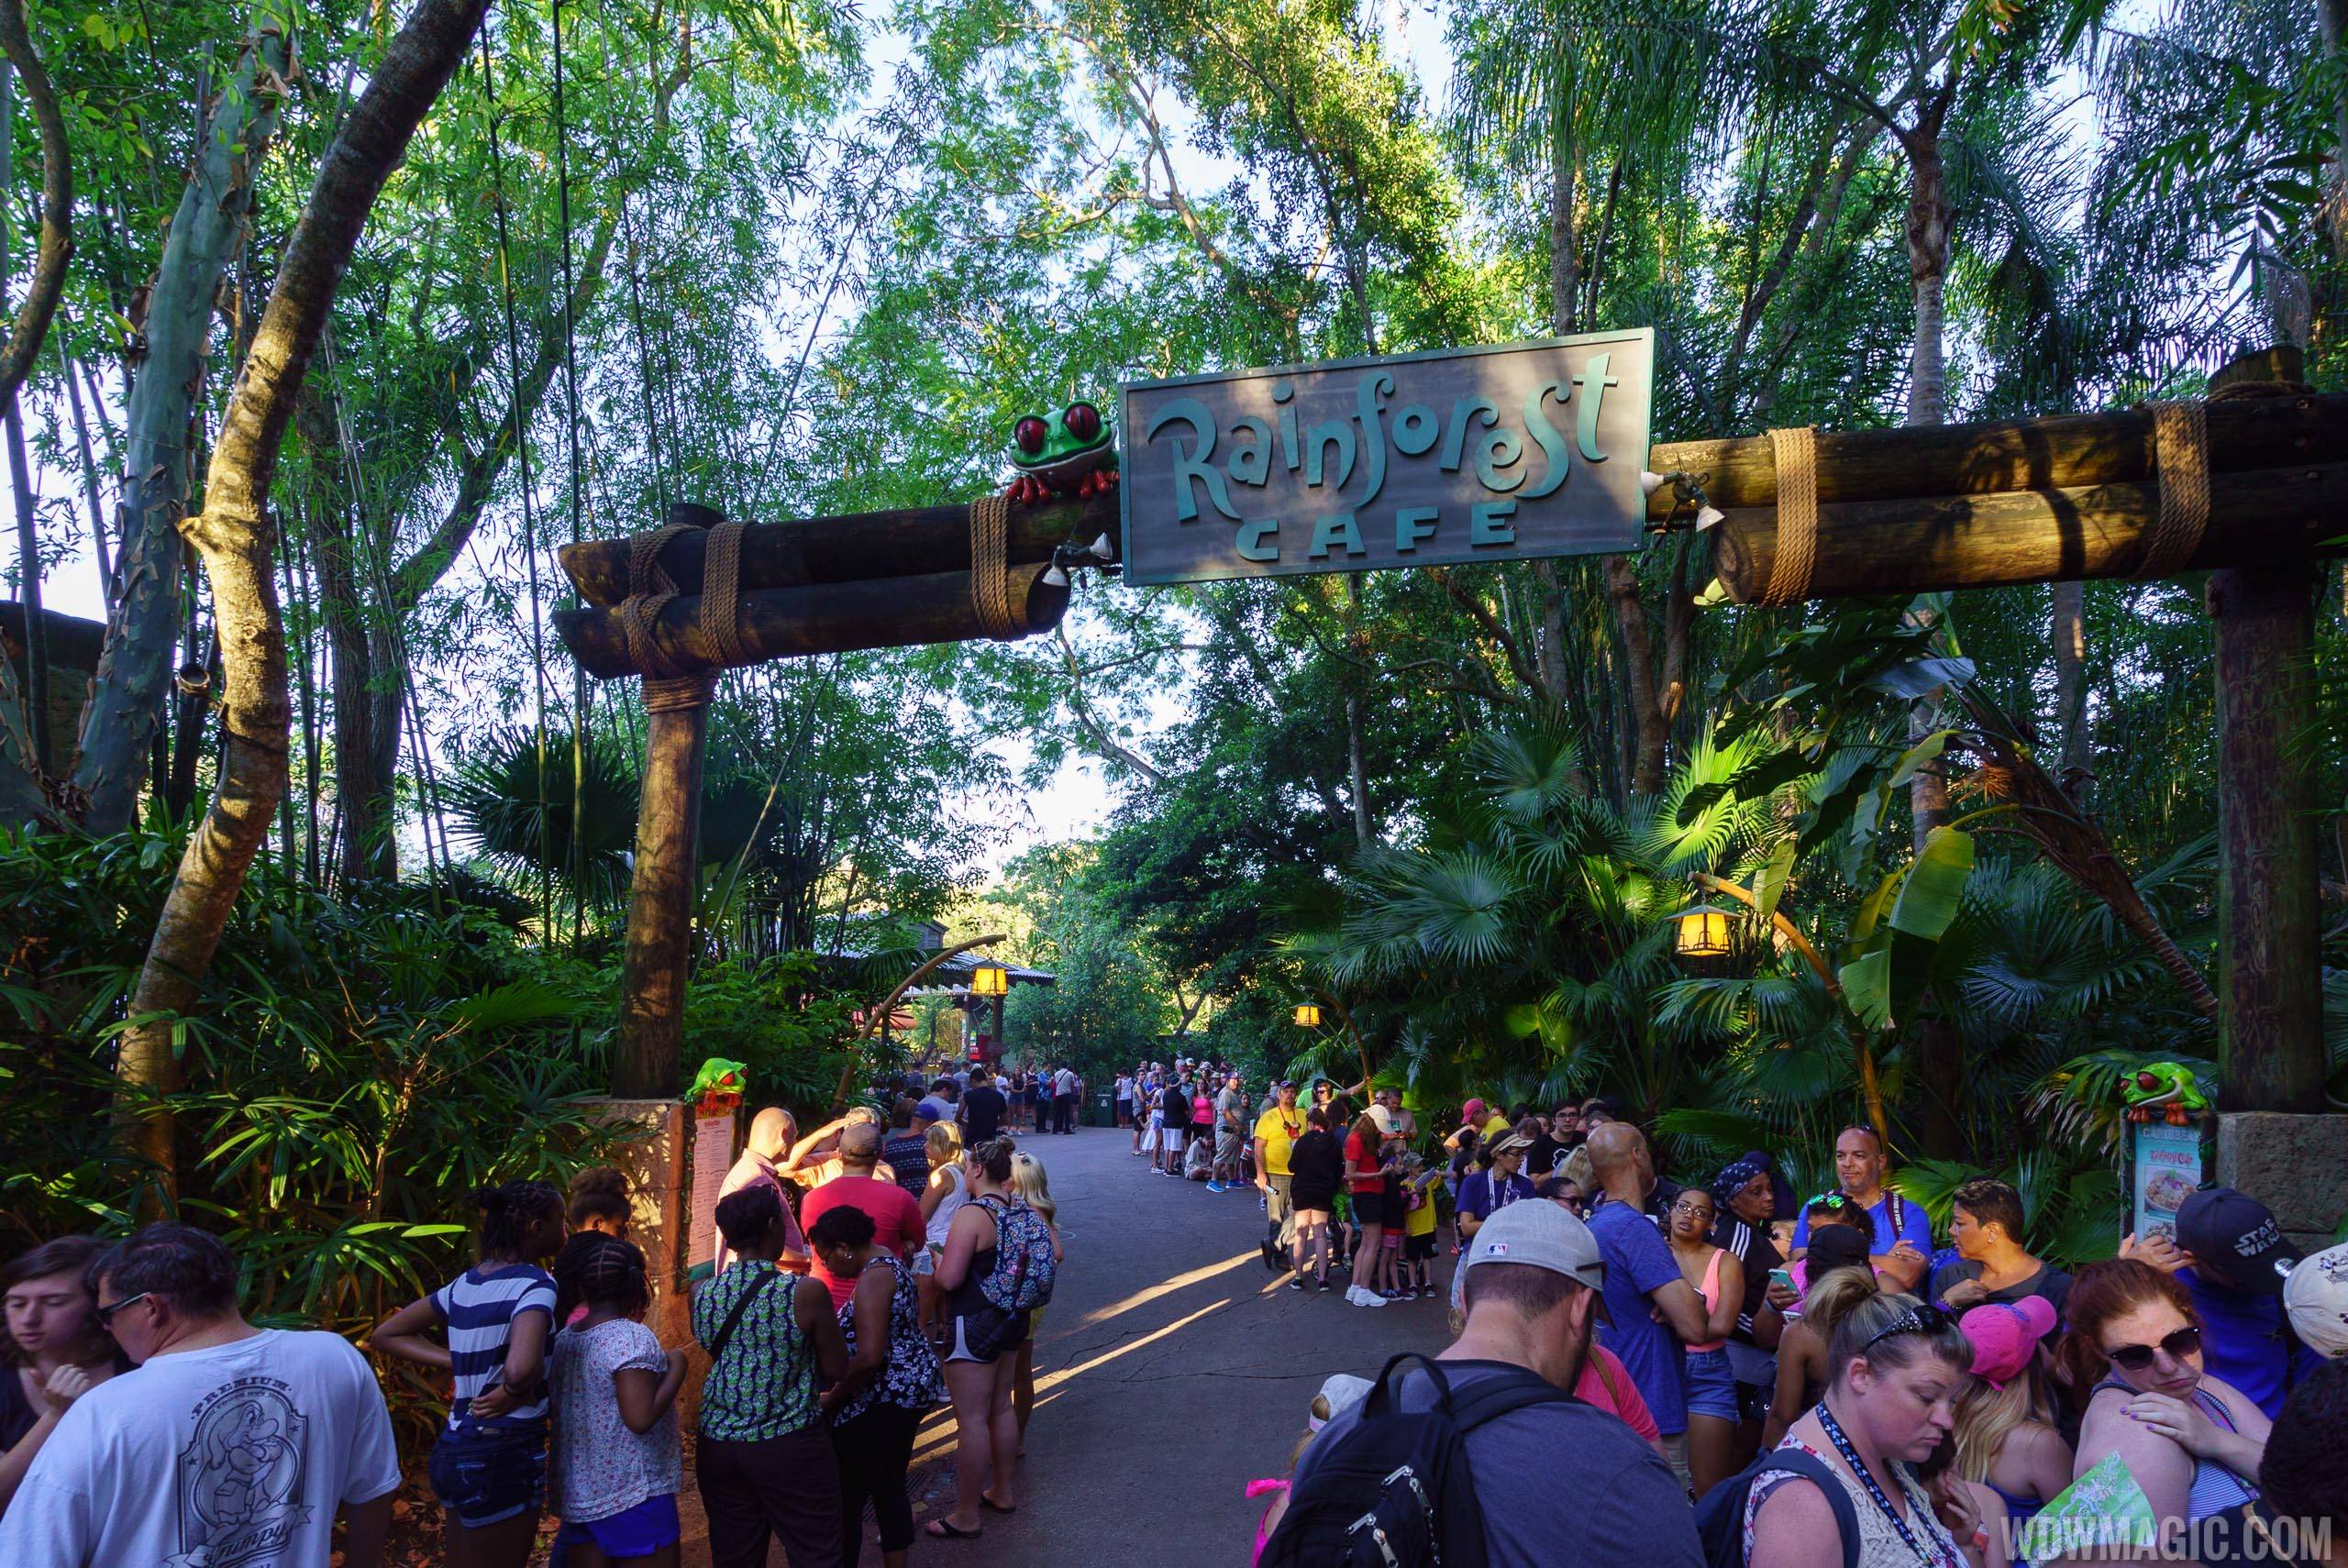 The Rainforest Cafe area is being used as queue space